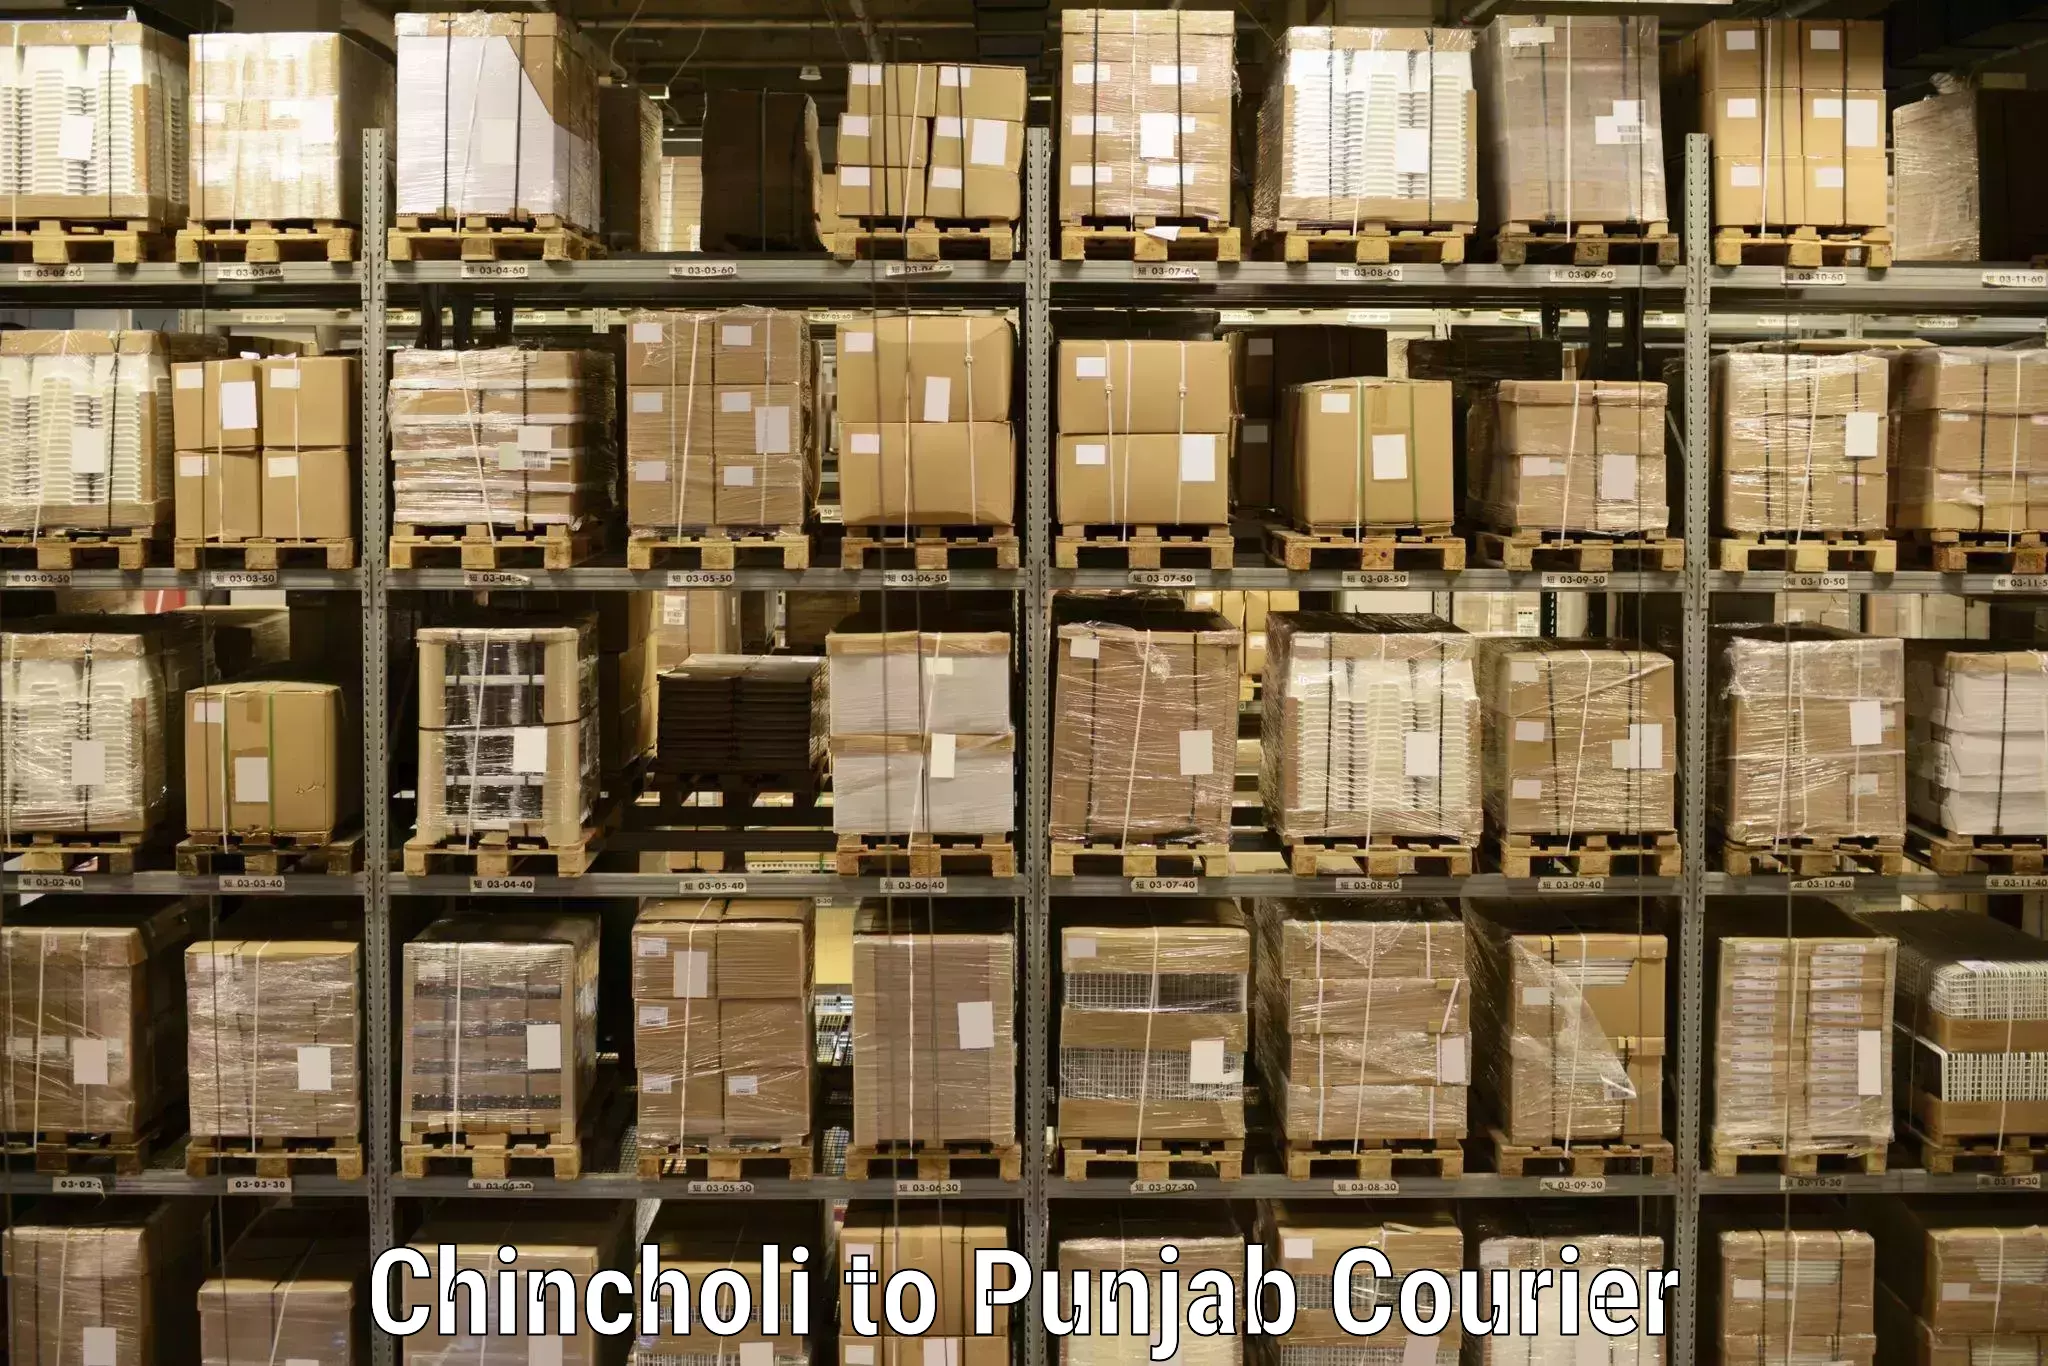 Courier service efficiency in Chincholi to Talwara